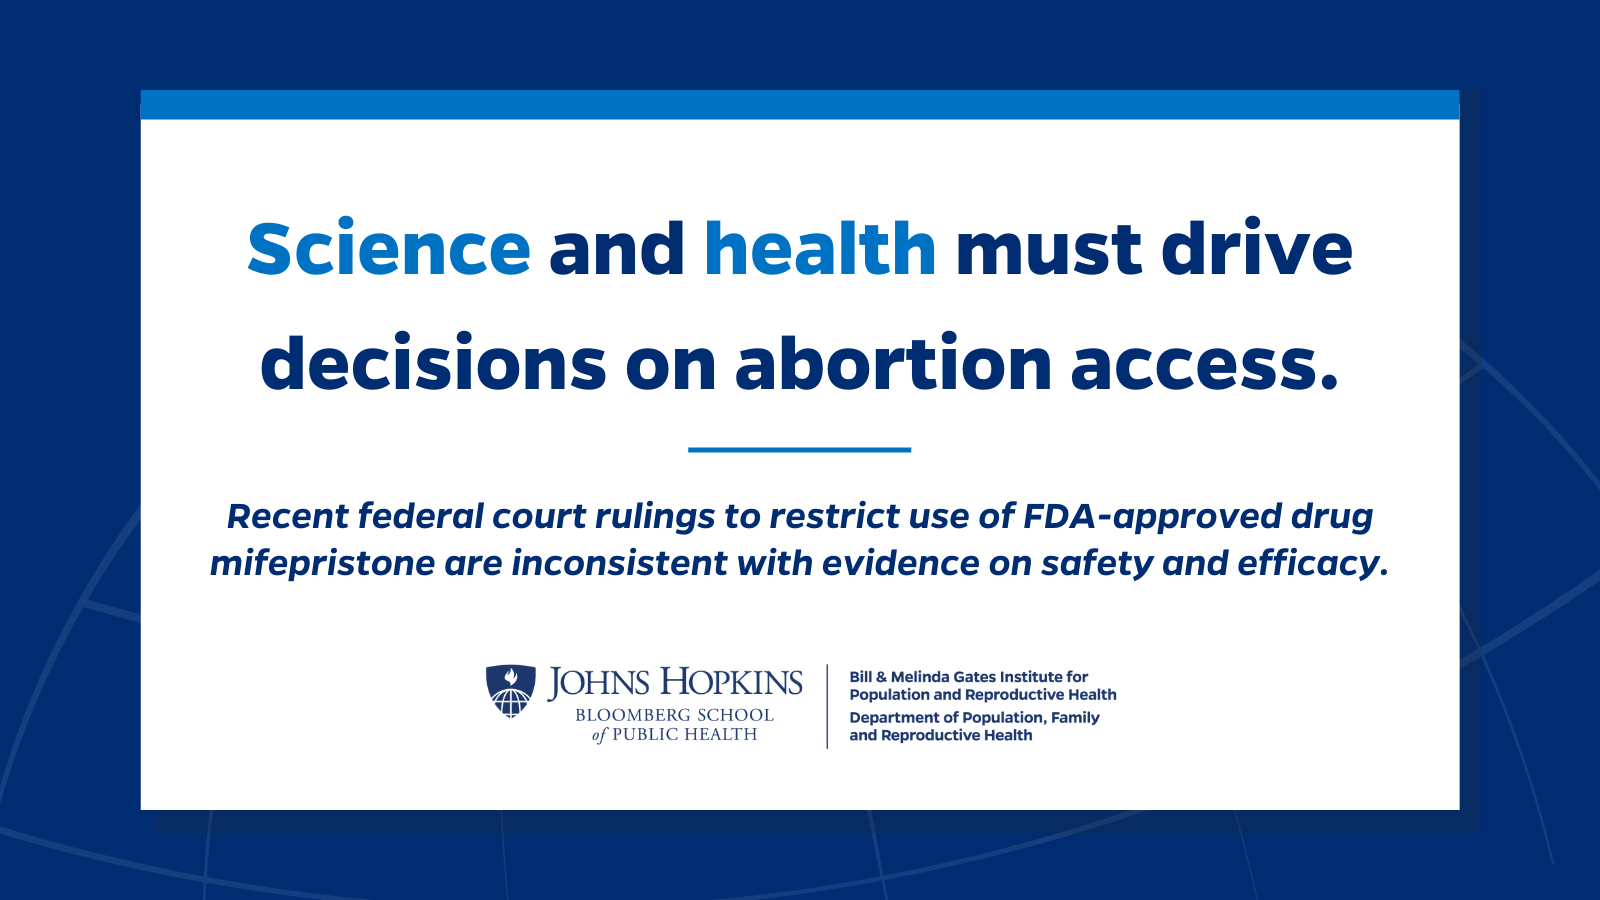 Science and health must drive decisions on abortion access